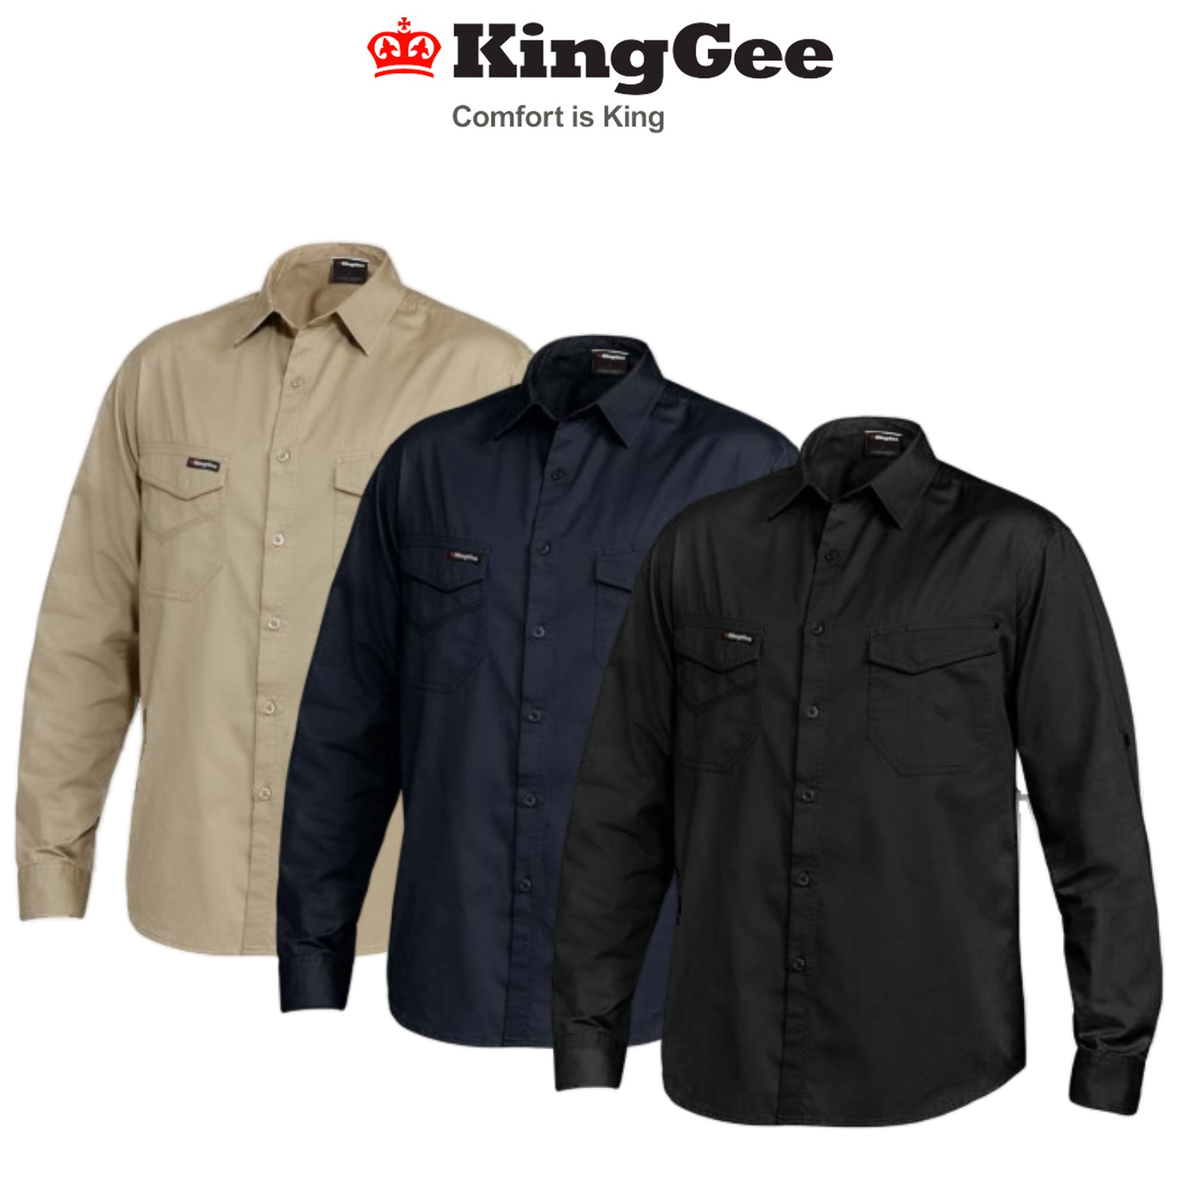 KingGee Mens Tradies Shirt L/S Fashioned Workwear Lightweight Breathable K14350